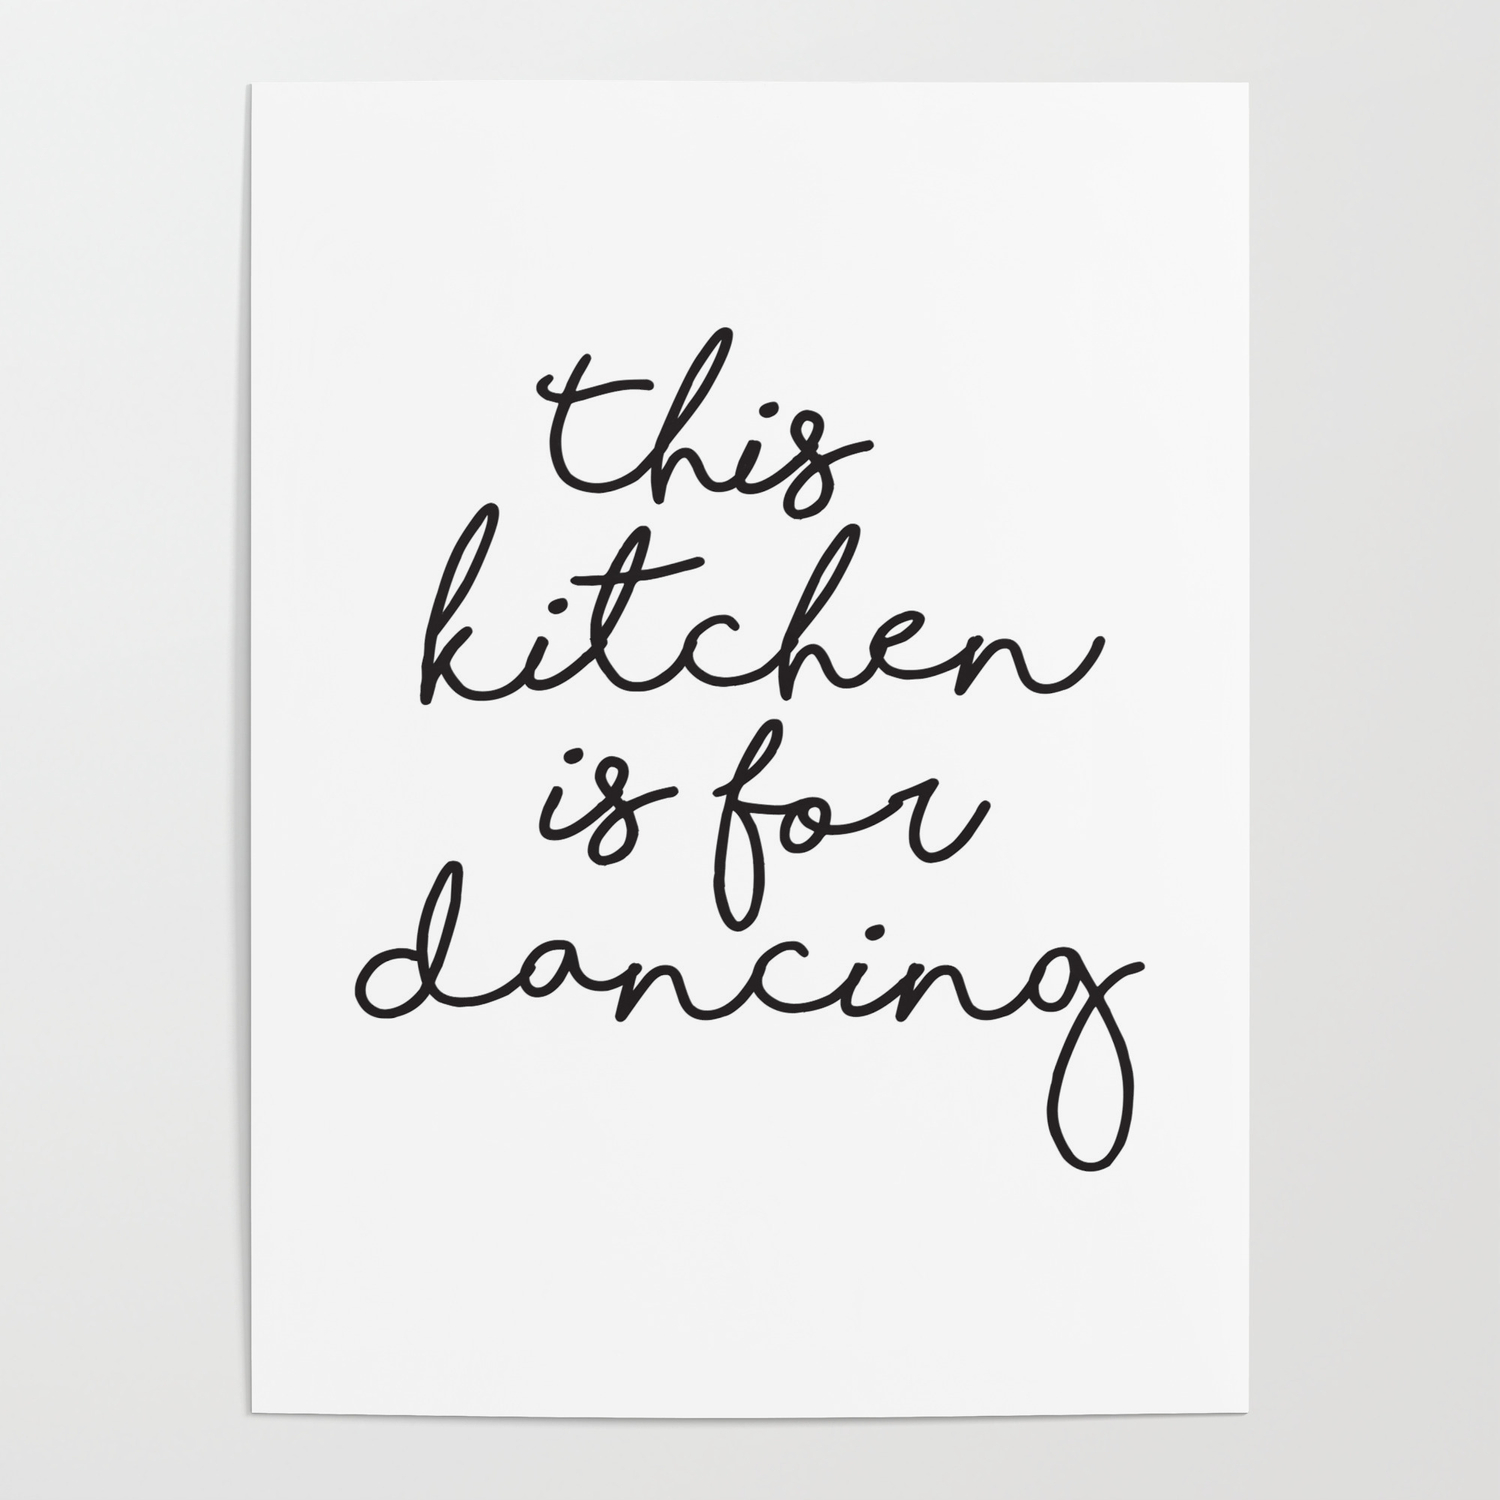 This Kitchen Is For Dancing A4 Print Poster PO445